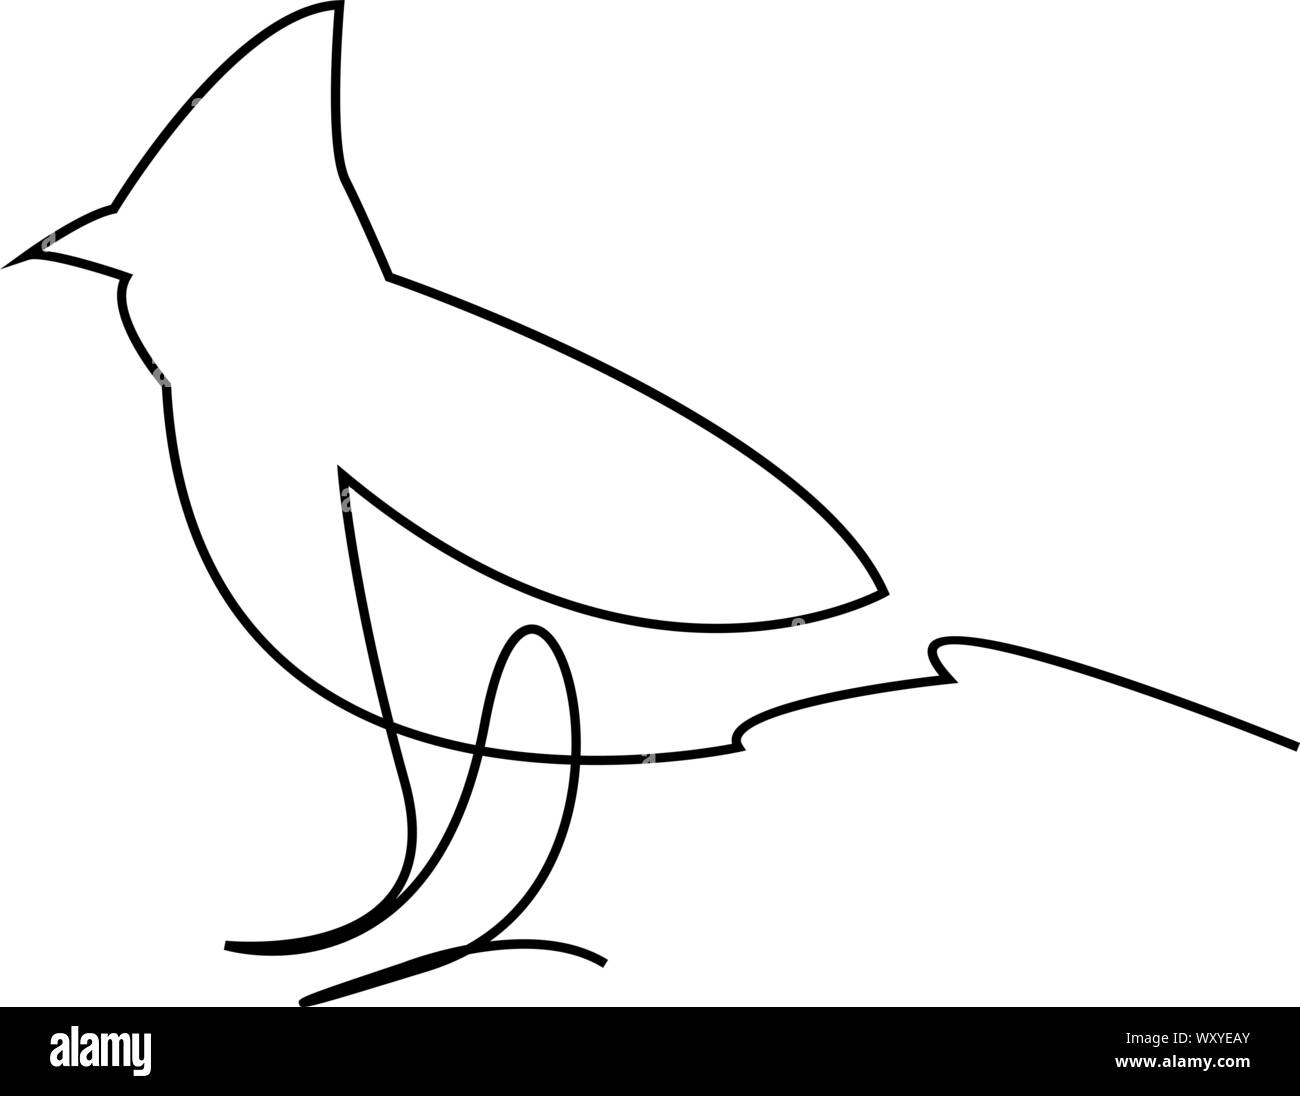 Bird one continuous line design. Vector illustration Stock Vector